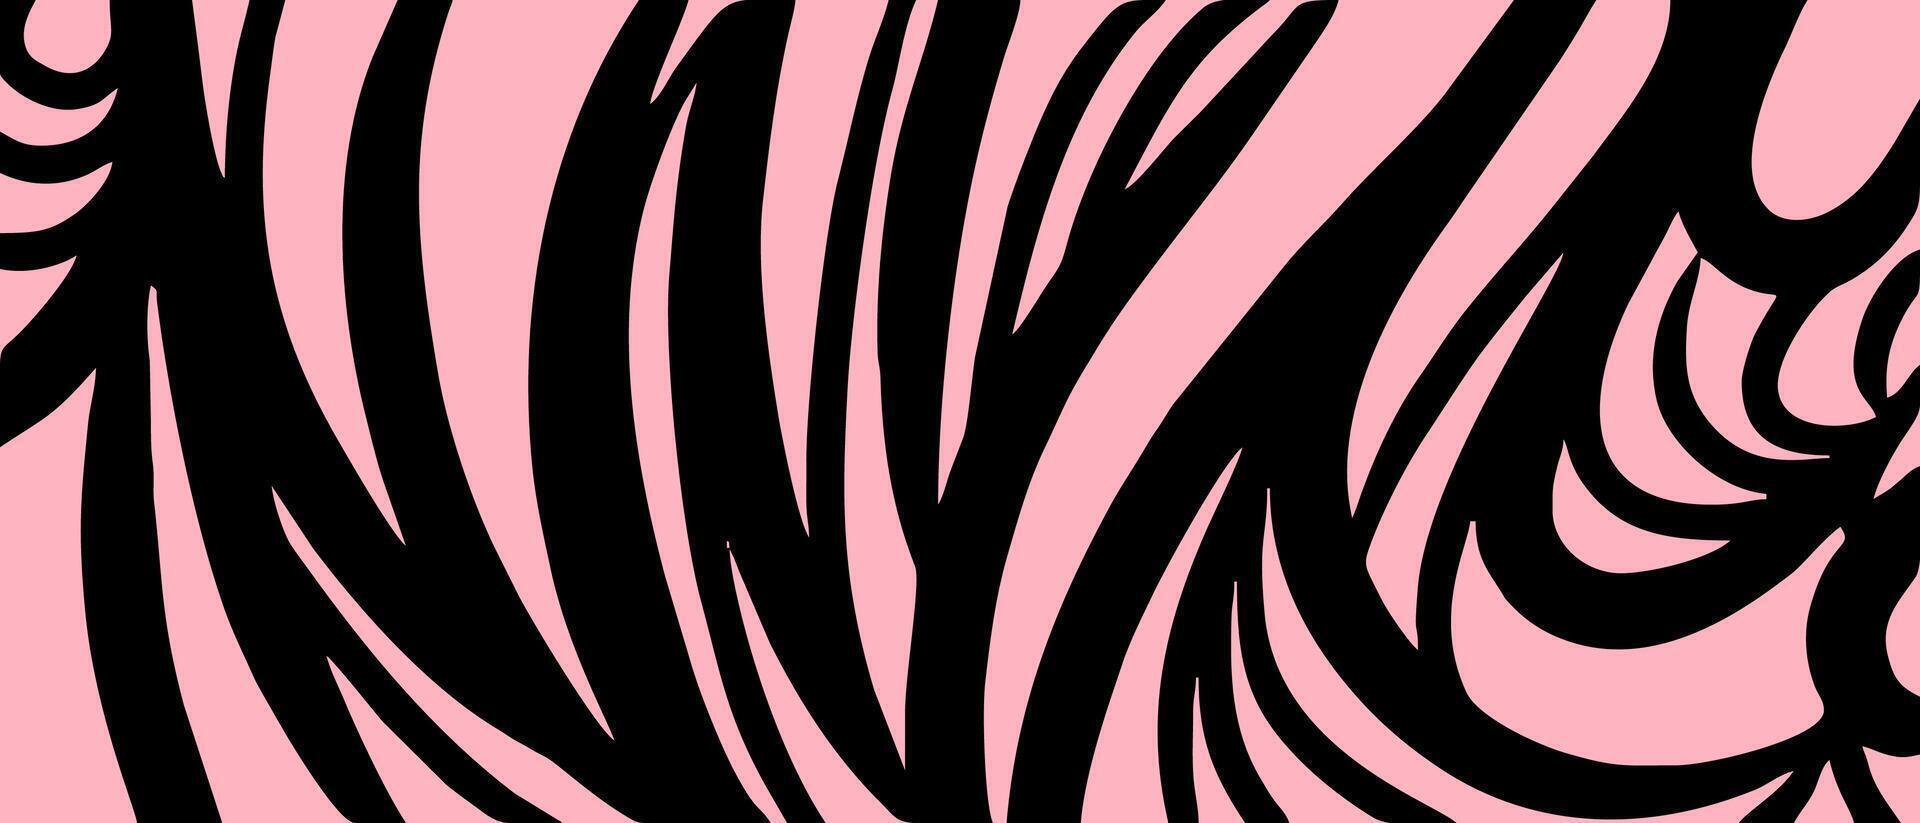 abstract stripes background. with pink color and trendy doodle style hand drawn lines vector